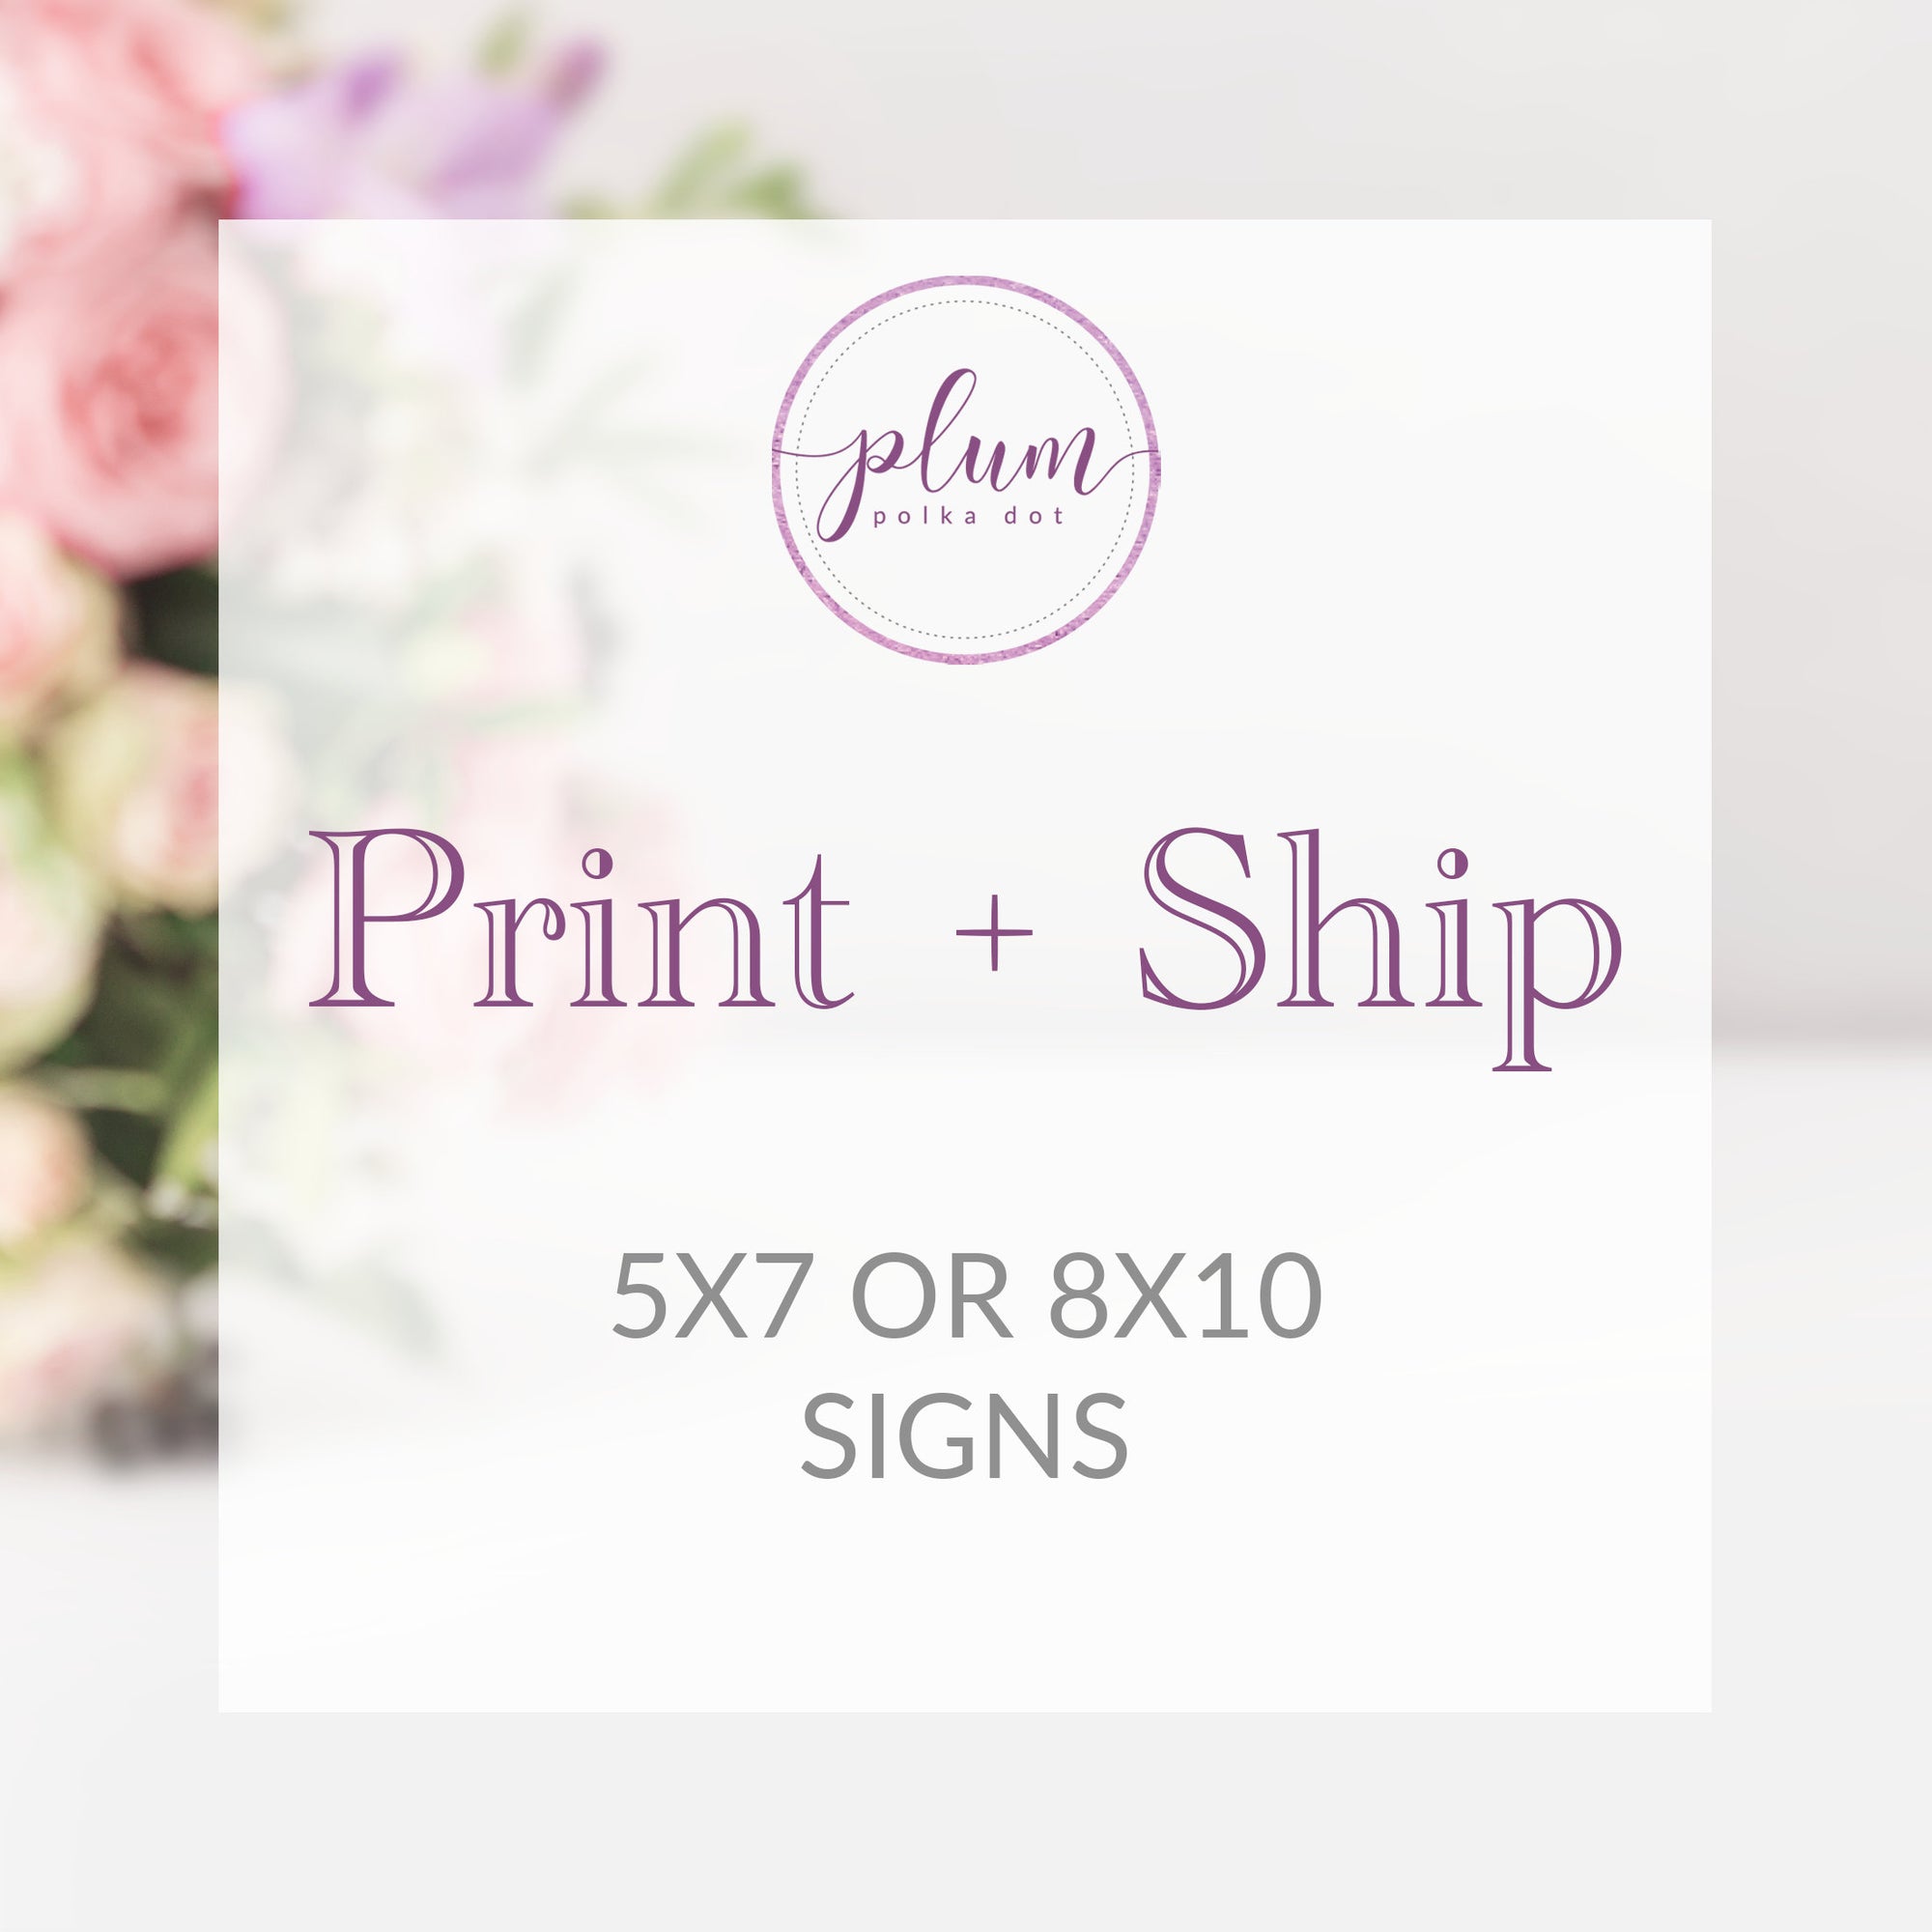 Print and Ship Add On - Get any 5x7 or 8x10 sign from our shop printed + shipped (note - must be purchased with the designs you would like)